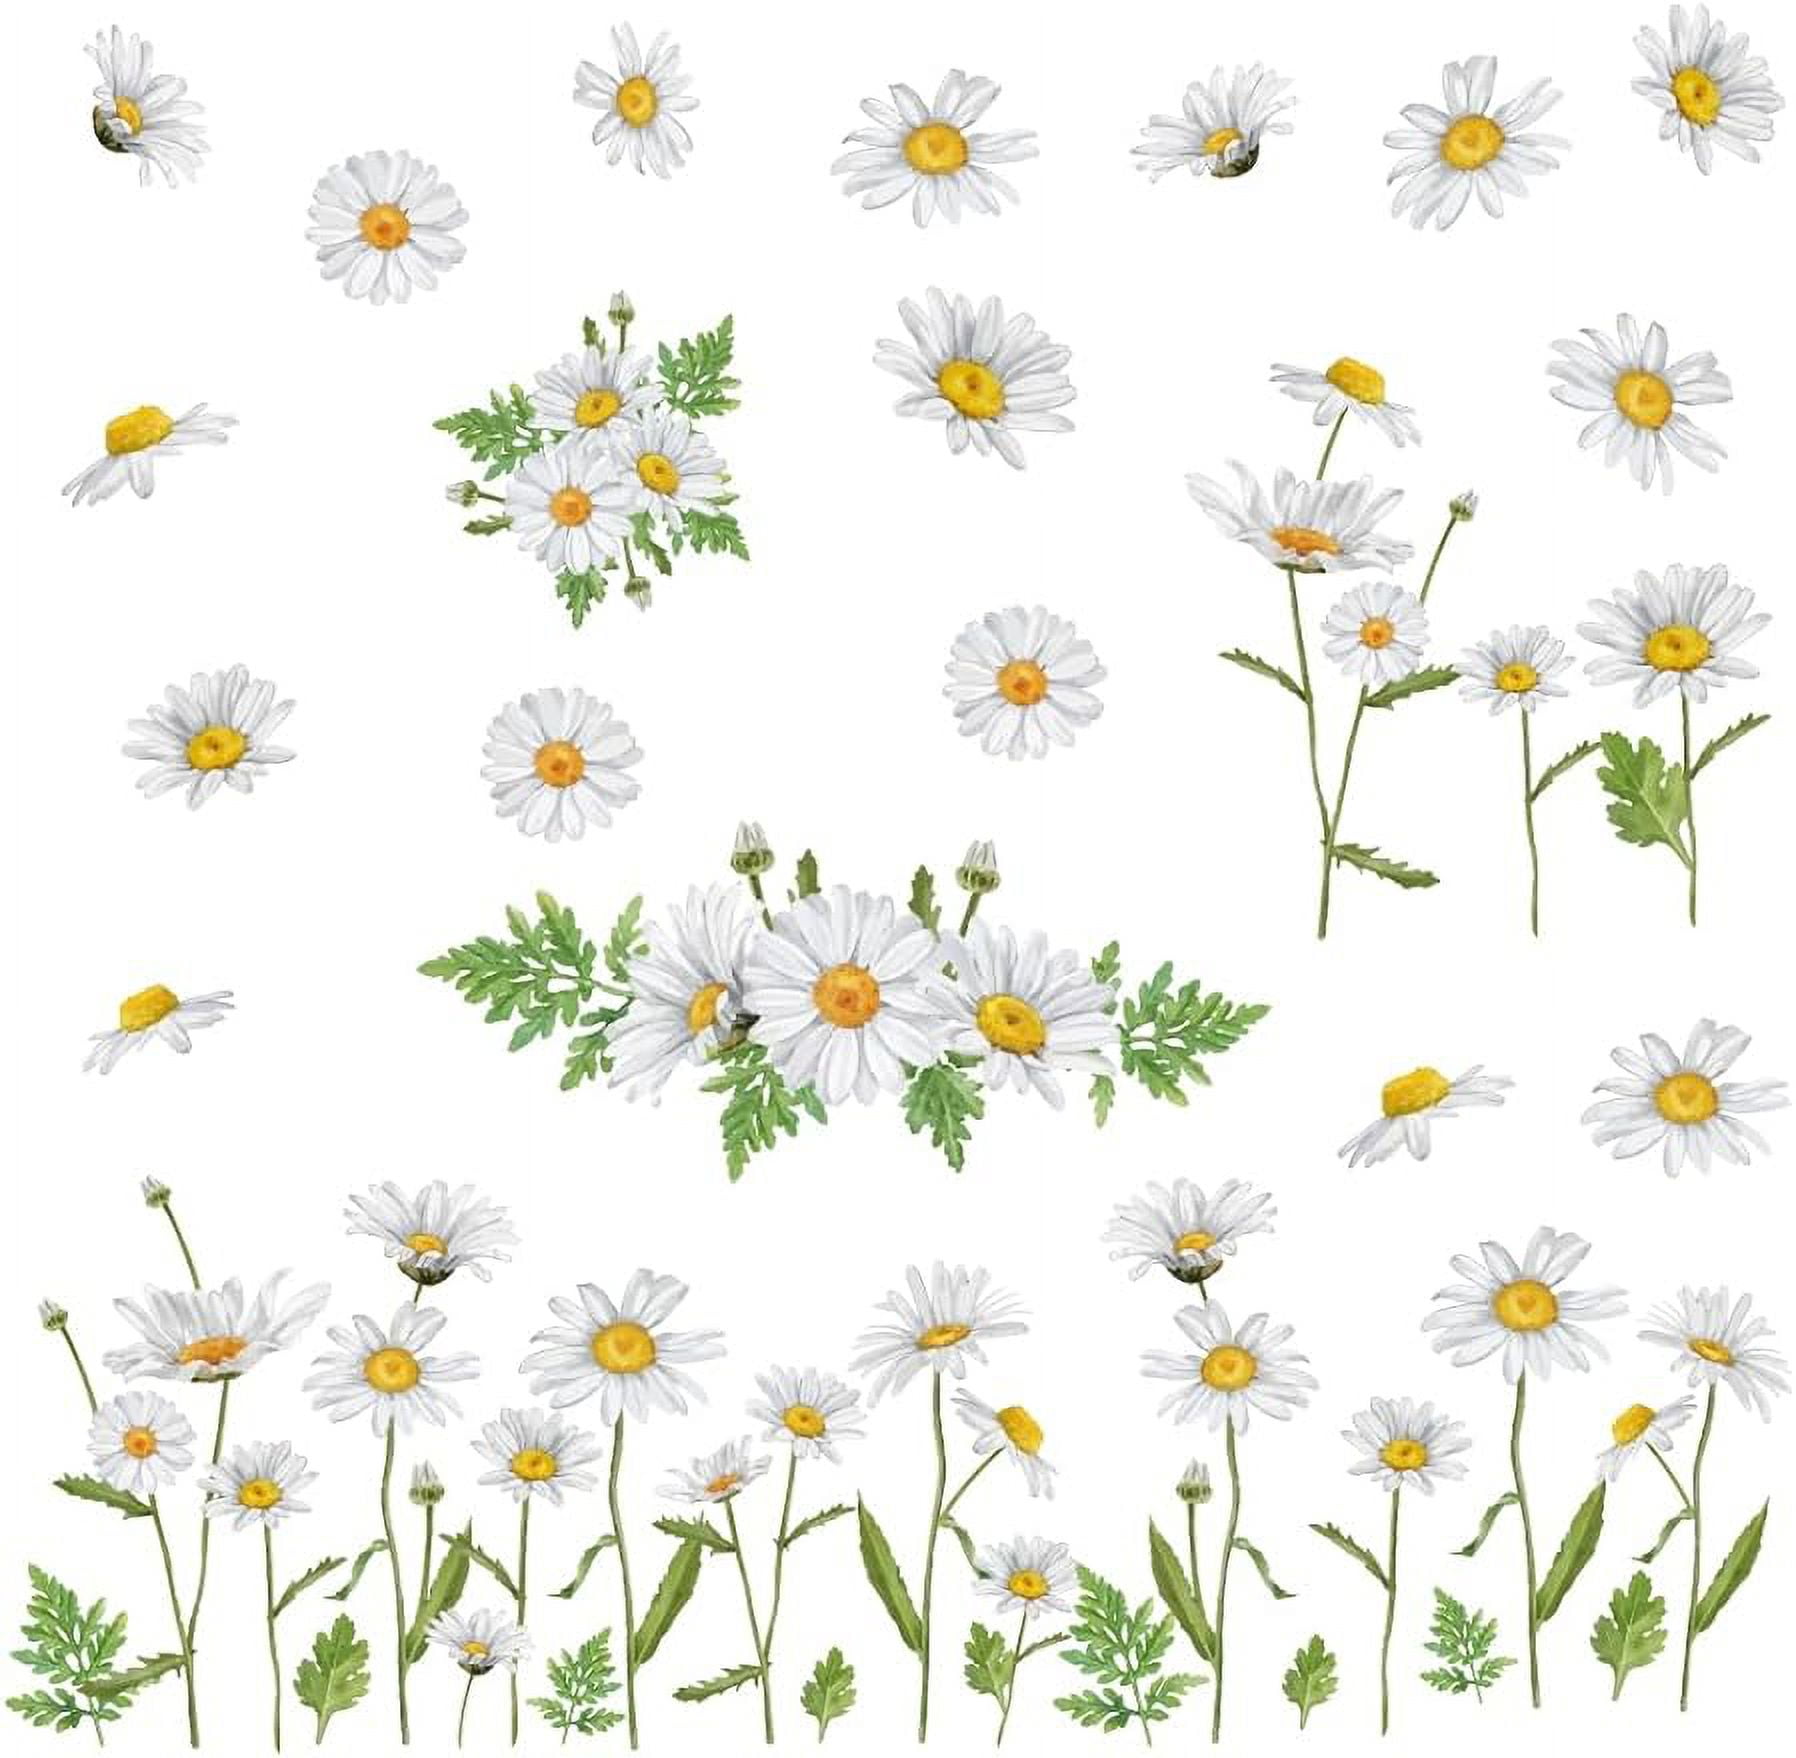 Wild Daisy Wall Sticker Colorful Wild Flower Vinyl Decals with Green Leaves  Art Decor for Bedroom Office Living Room